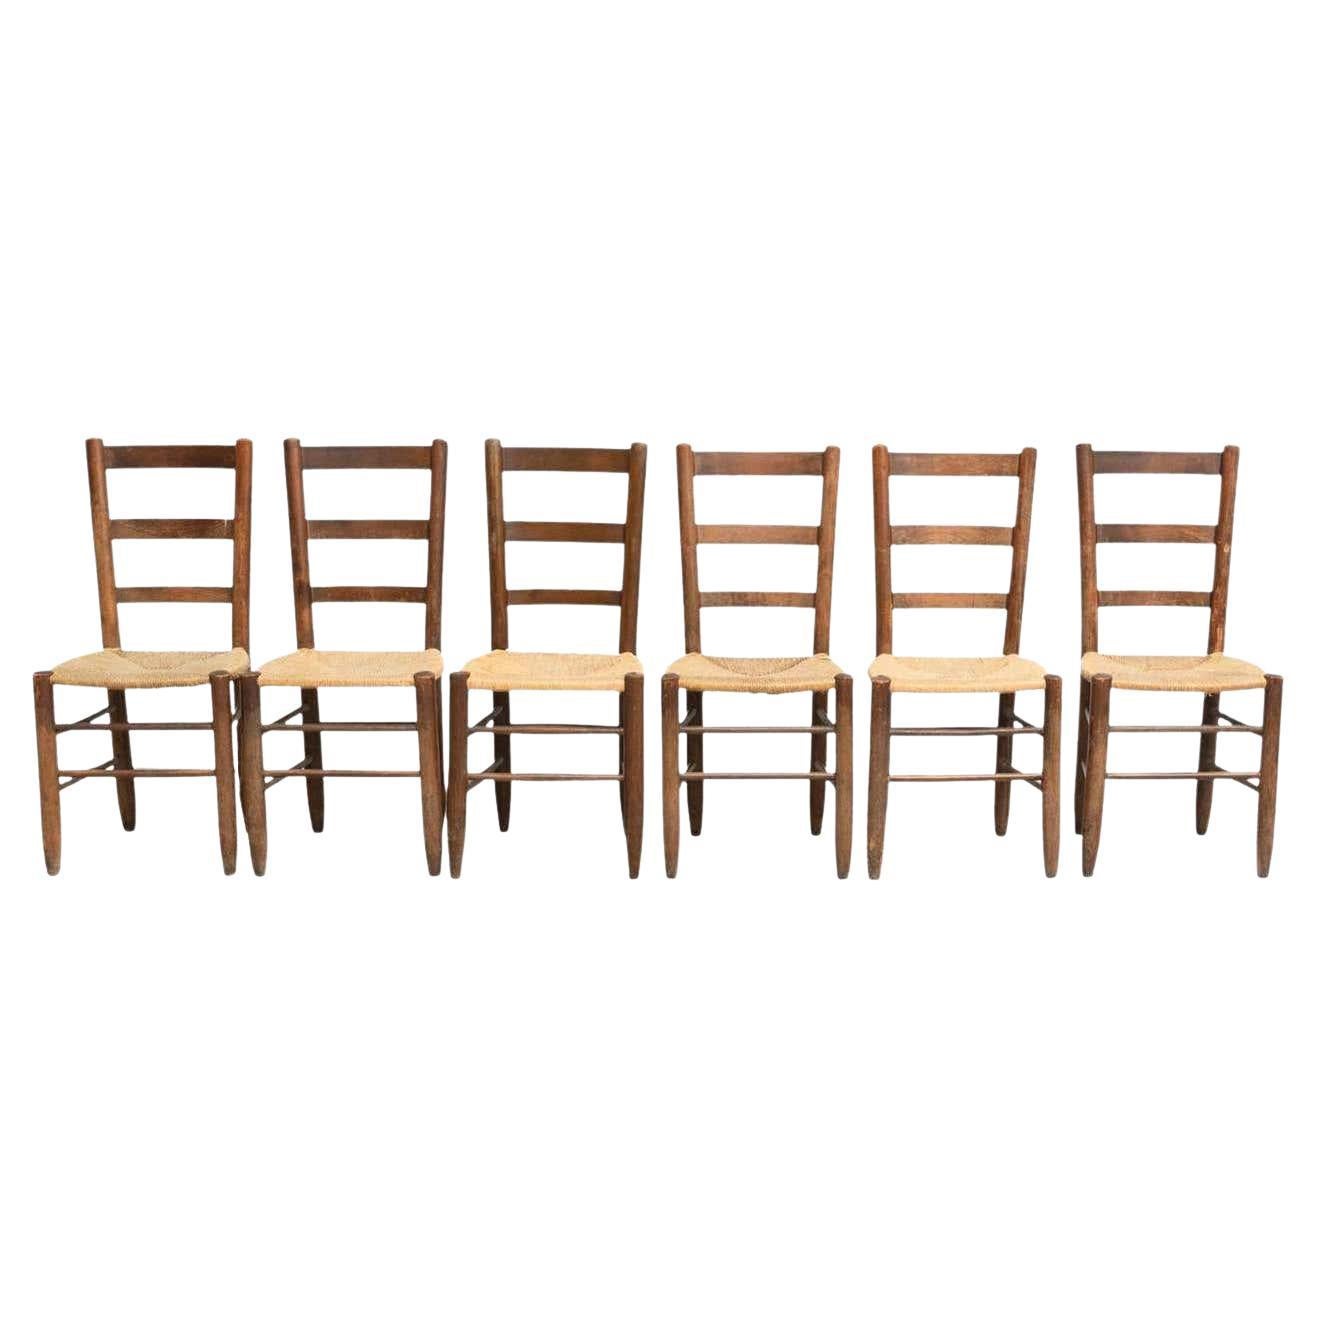 Set of 6 After Charlotte Perriand N.19 Chair, Wood Rattan, Mid-Century Modern